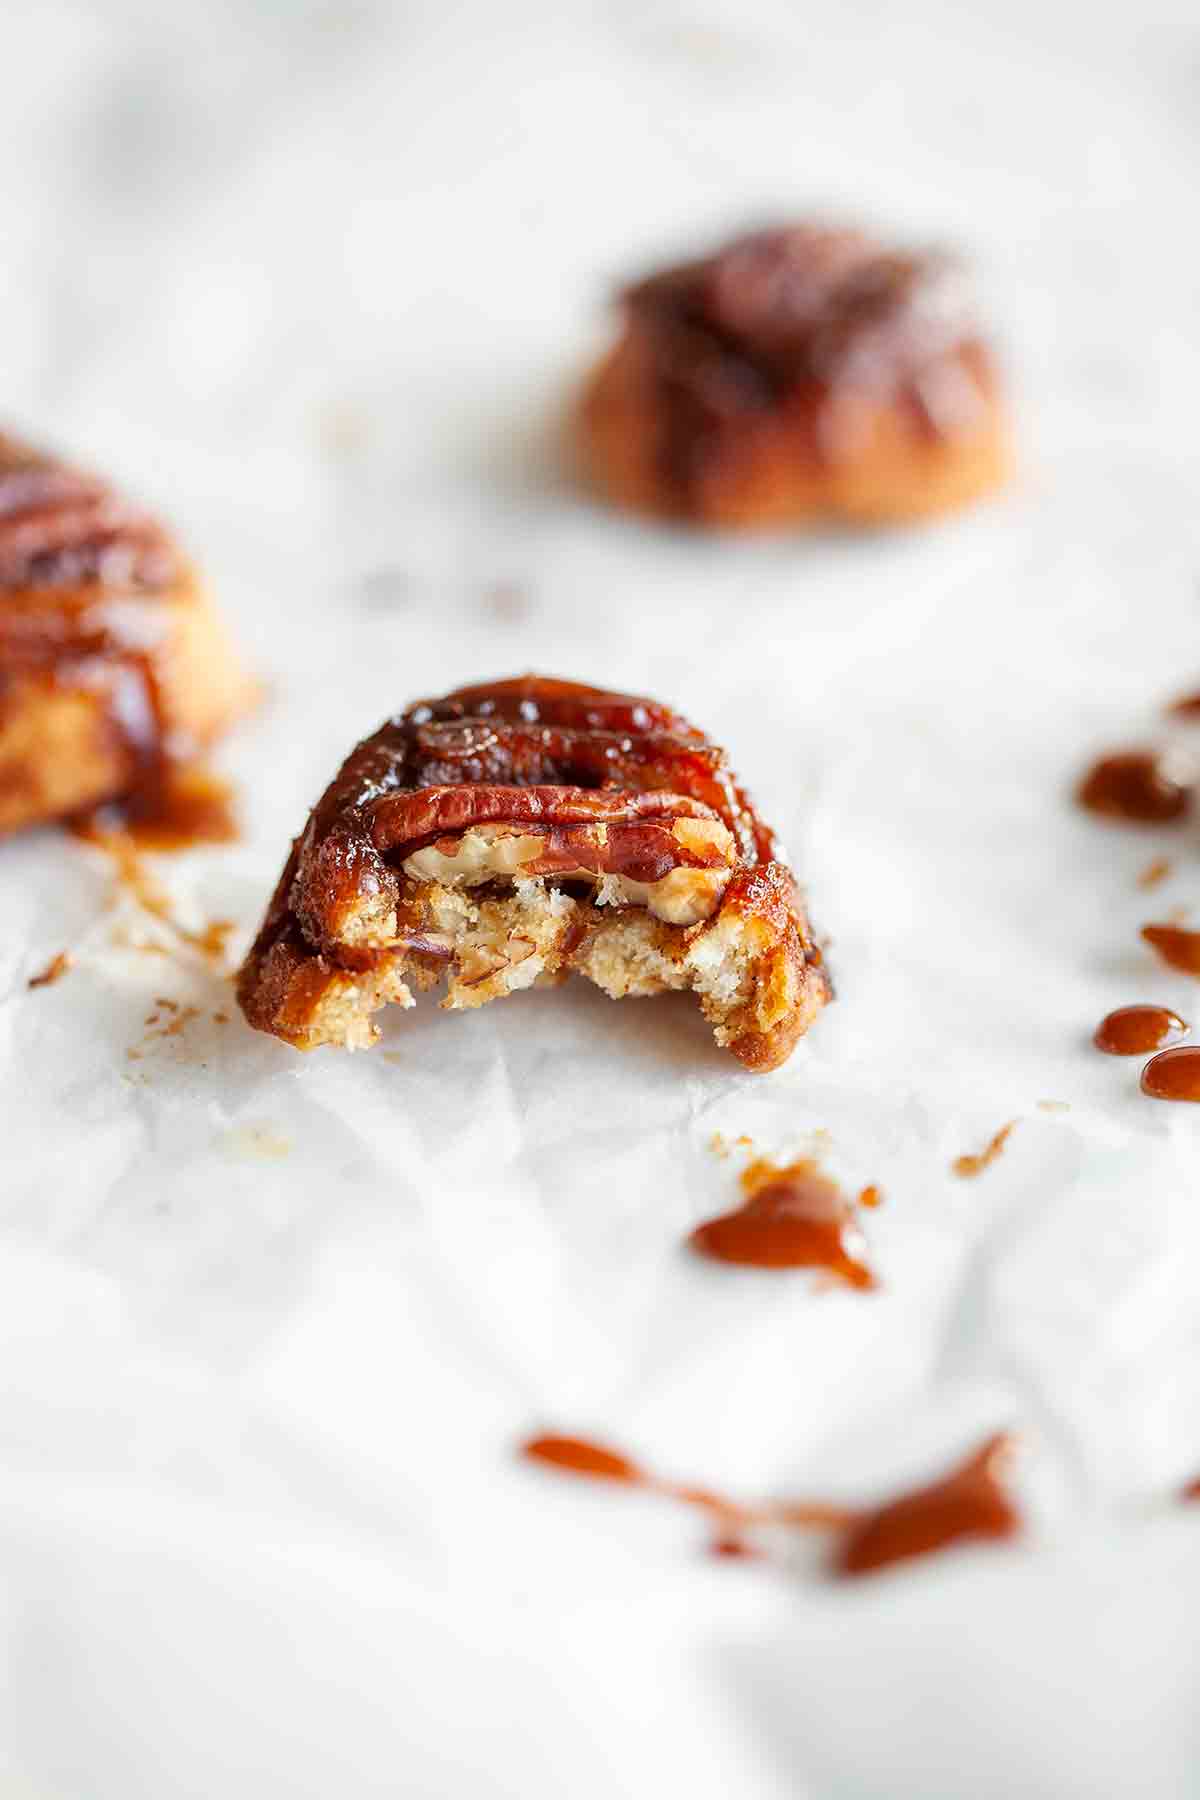 A half-eaten sticky pecan bite with a few in the background.